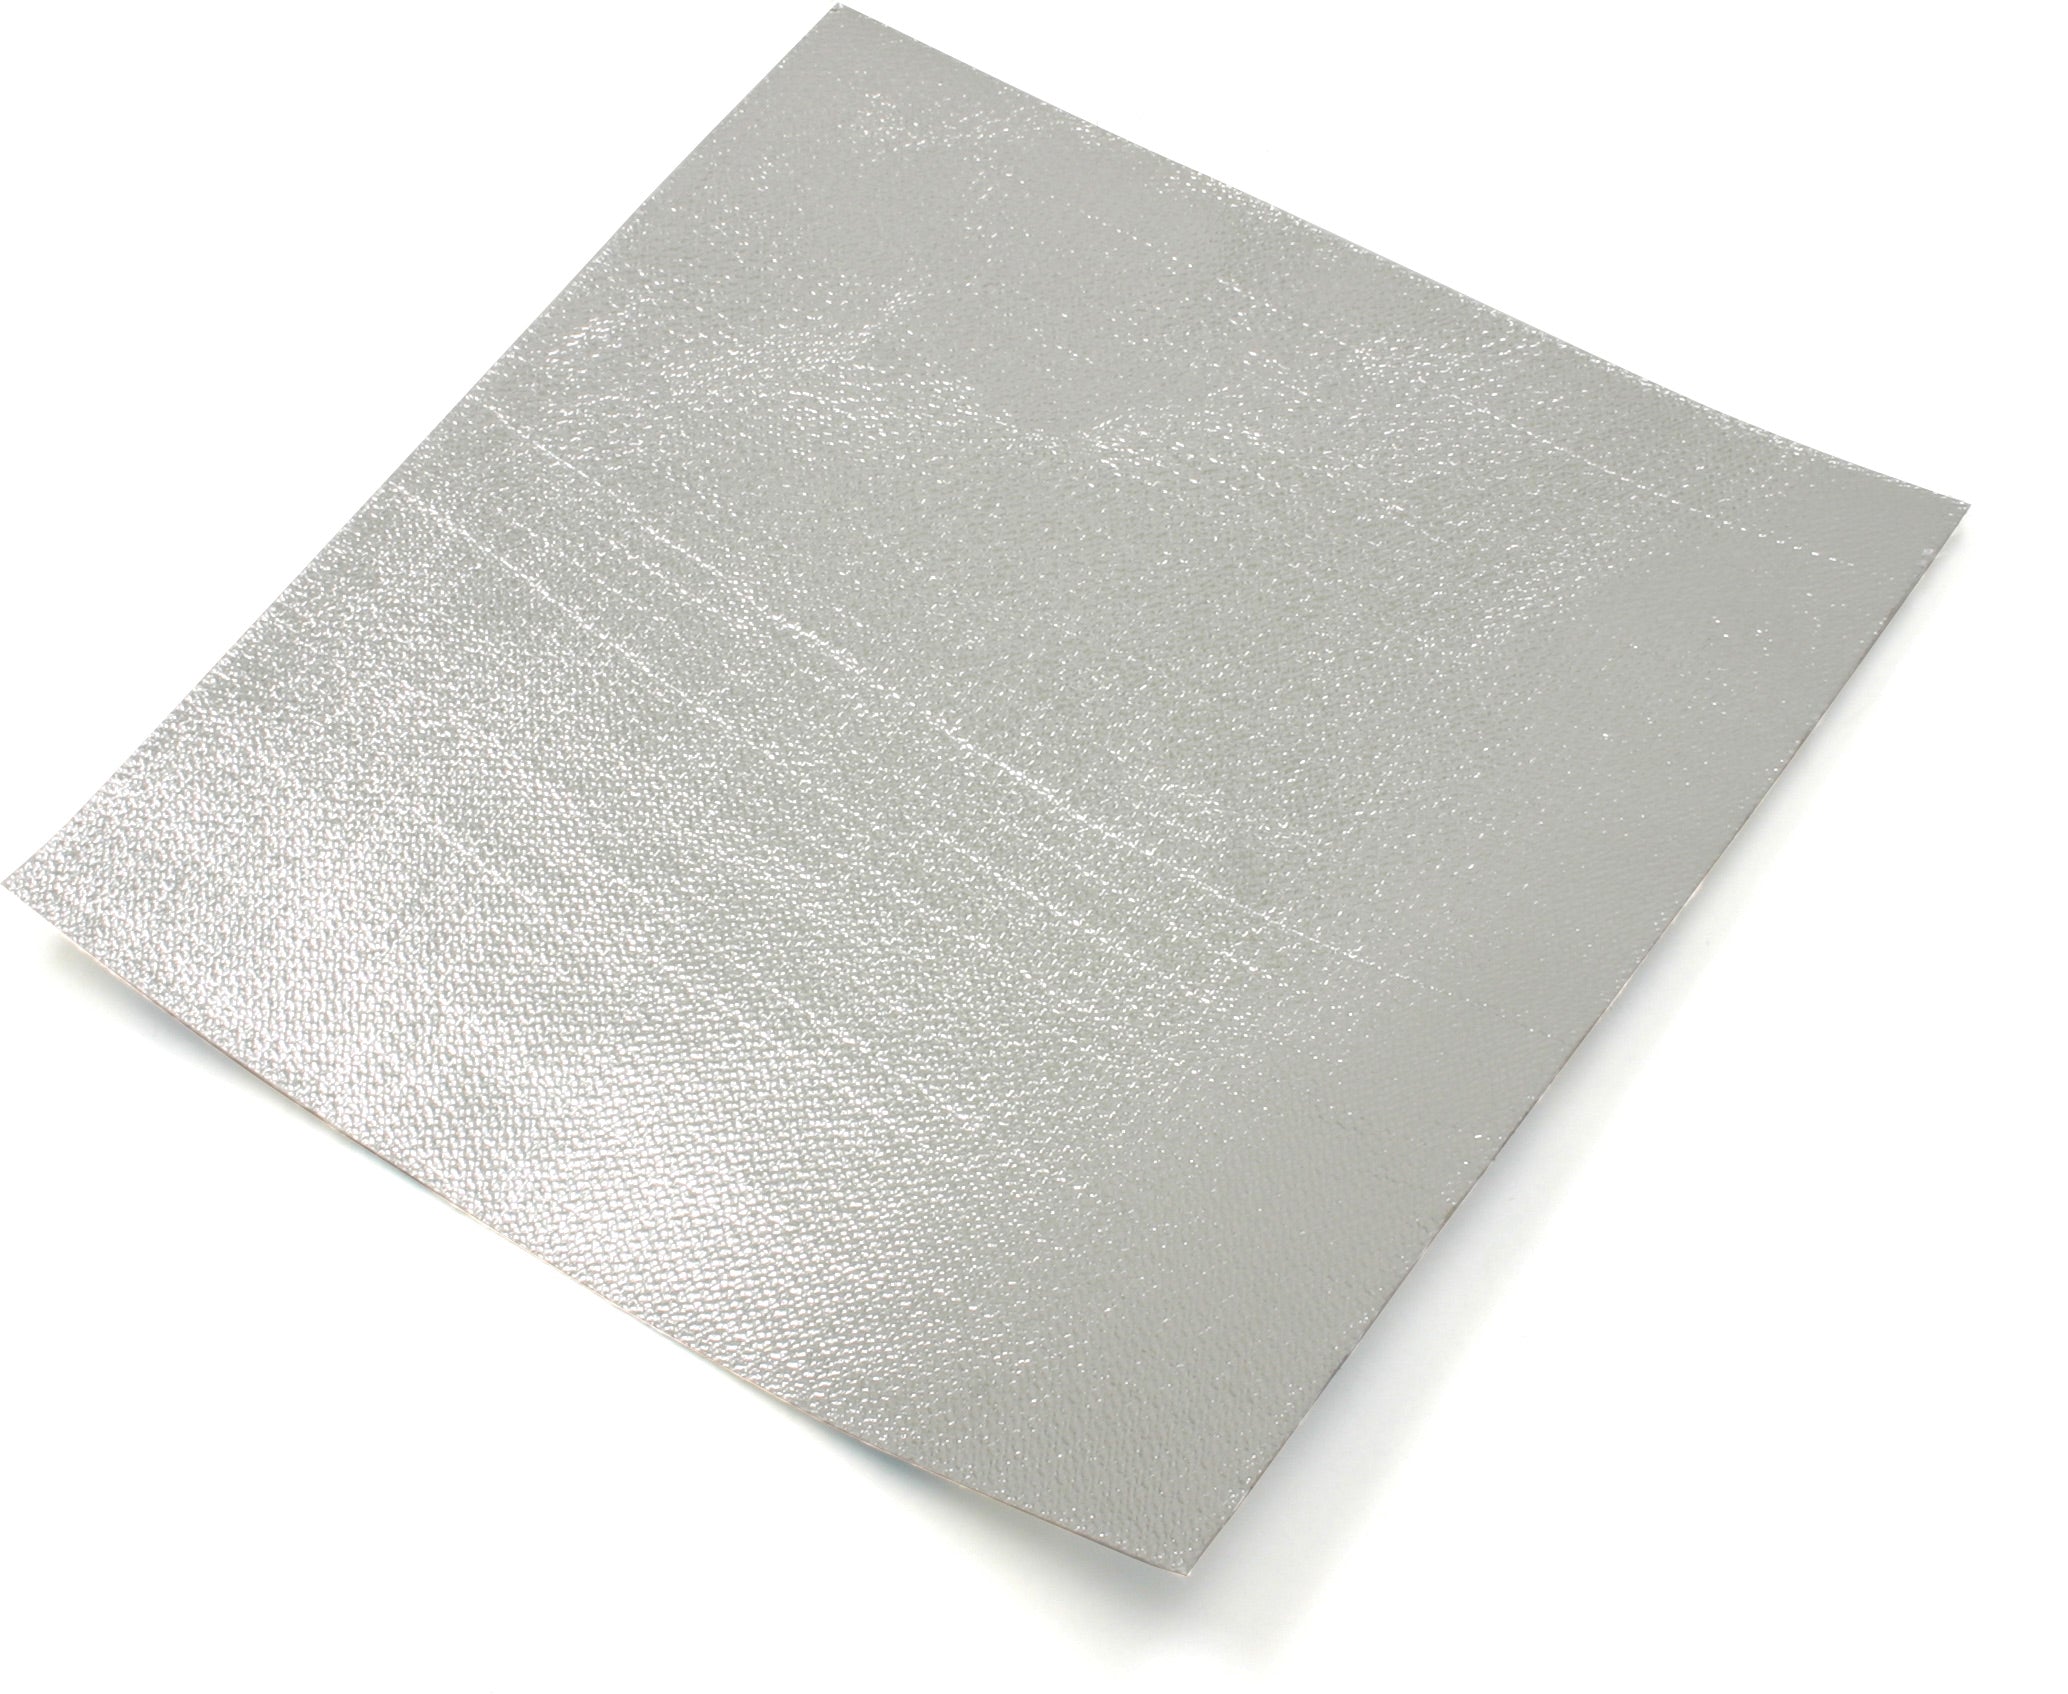 Adhesive sticky back heat shield sheet installed in automotive application